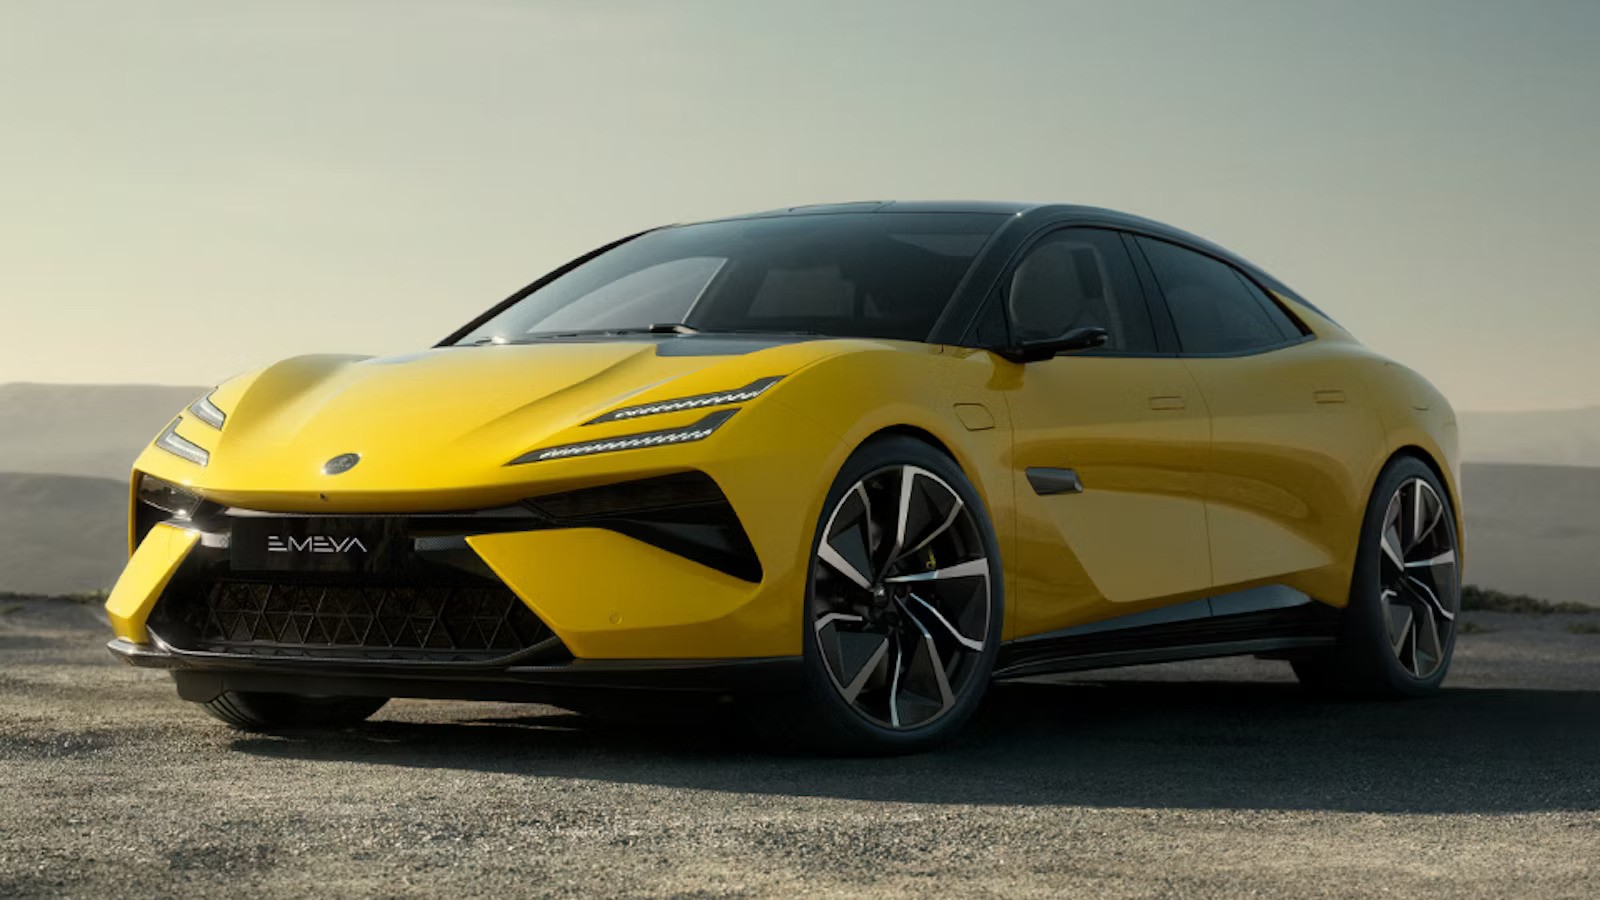 The MG Cyberster, a retro-inspired electric convertible, offers 496hp, 0-60mph in 3.2 seconds, and starts at £54,995. Named Carwow’s Most Anticipated Car of the Year for 2024.